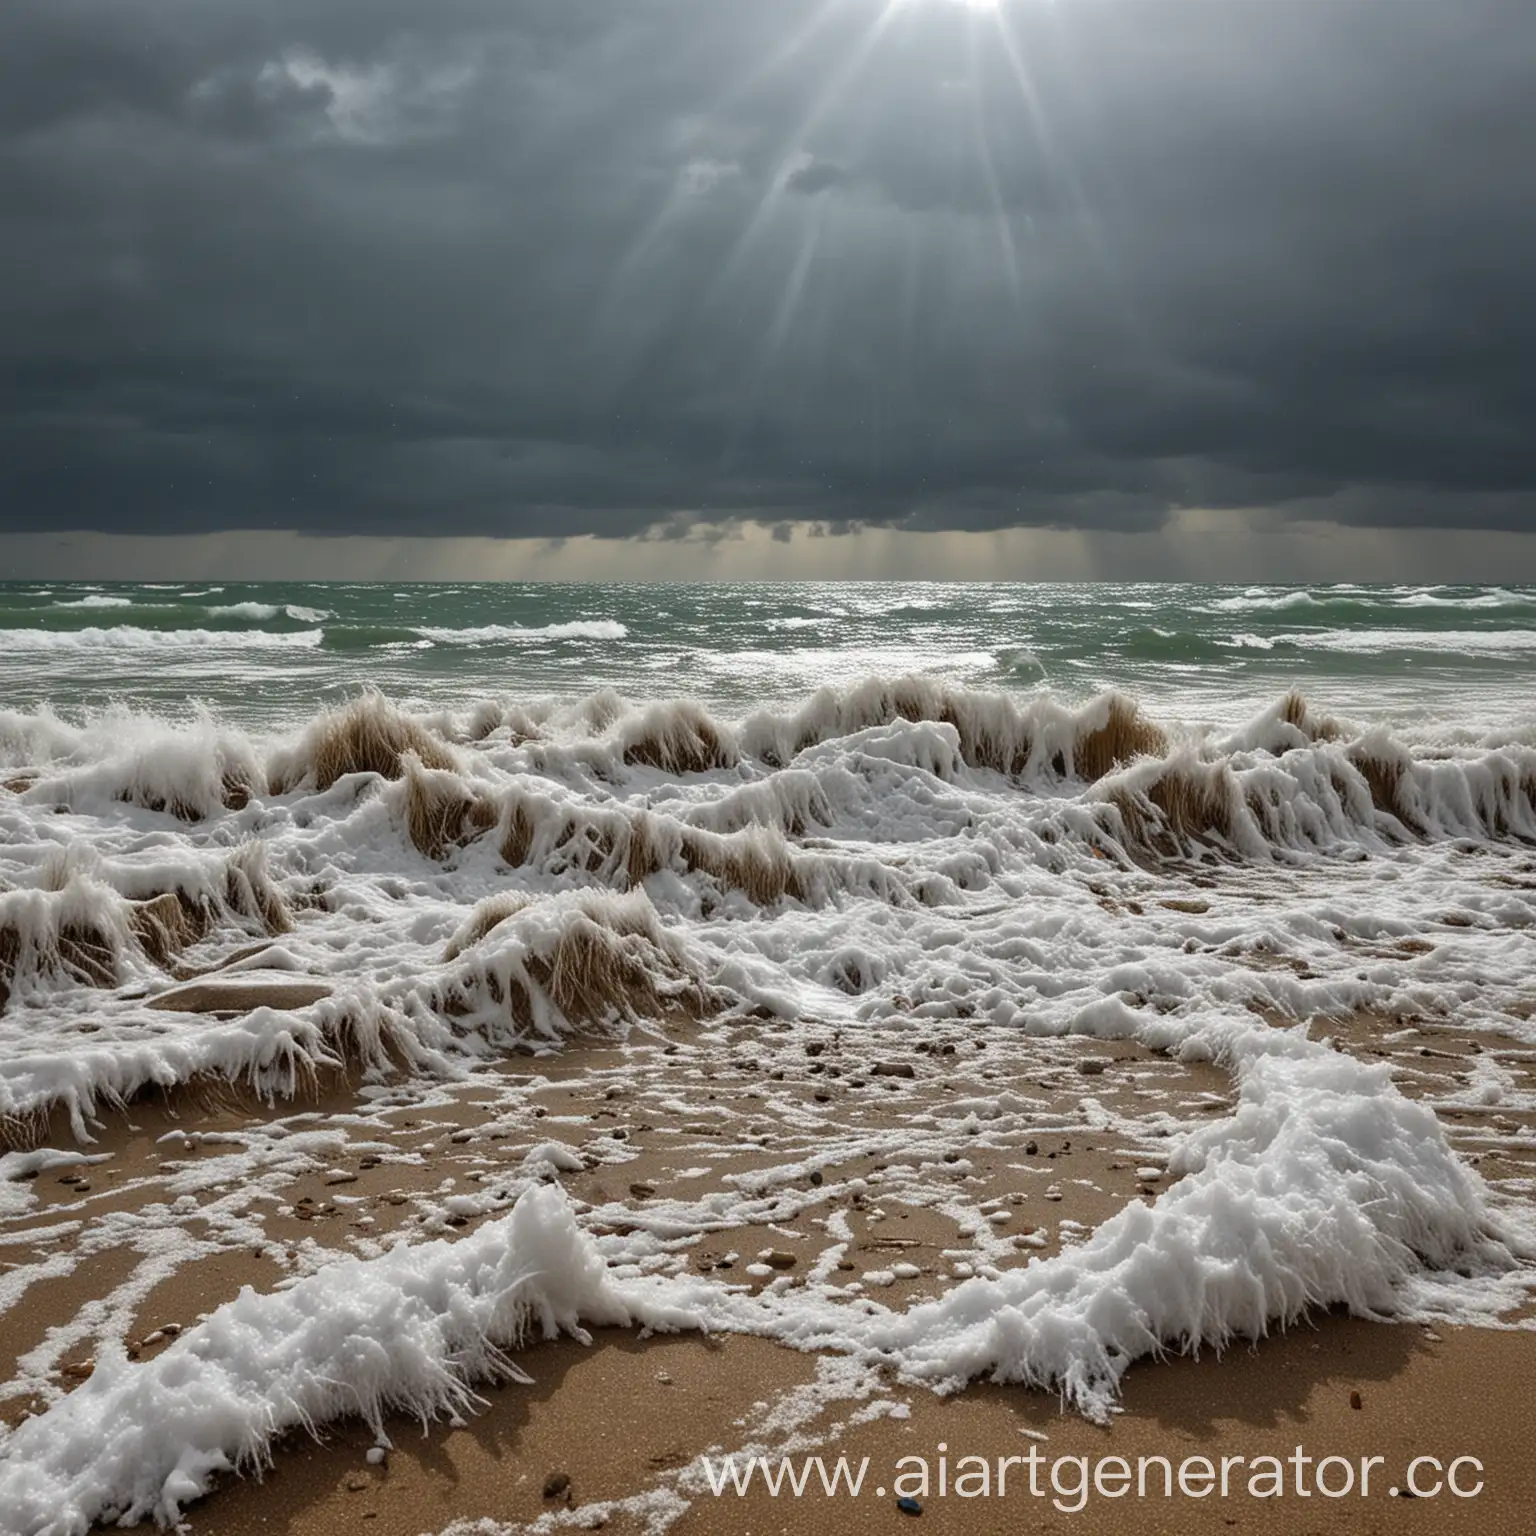 Dynamic-Weather-Scenes-From-Rain-to-Sunshine-on-the-Beach